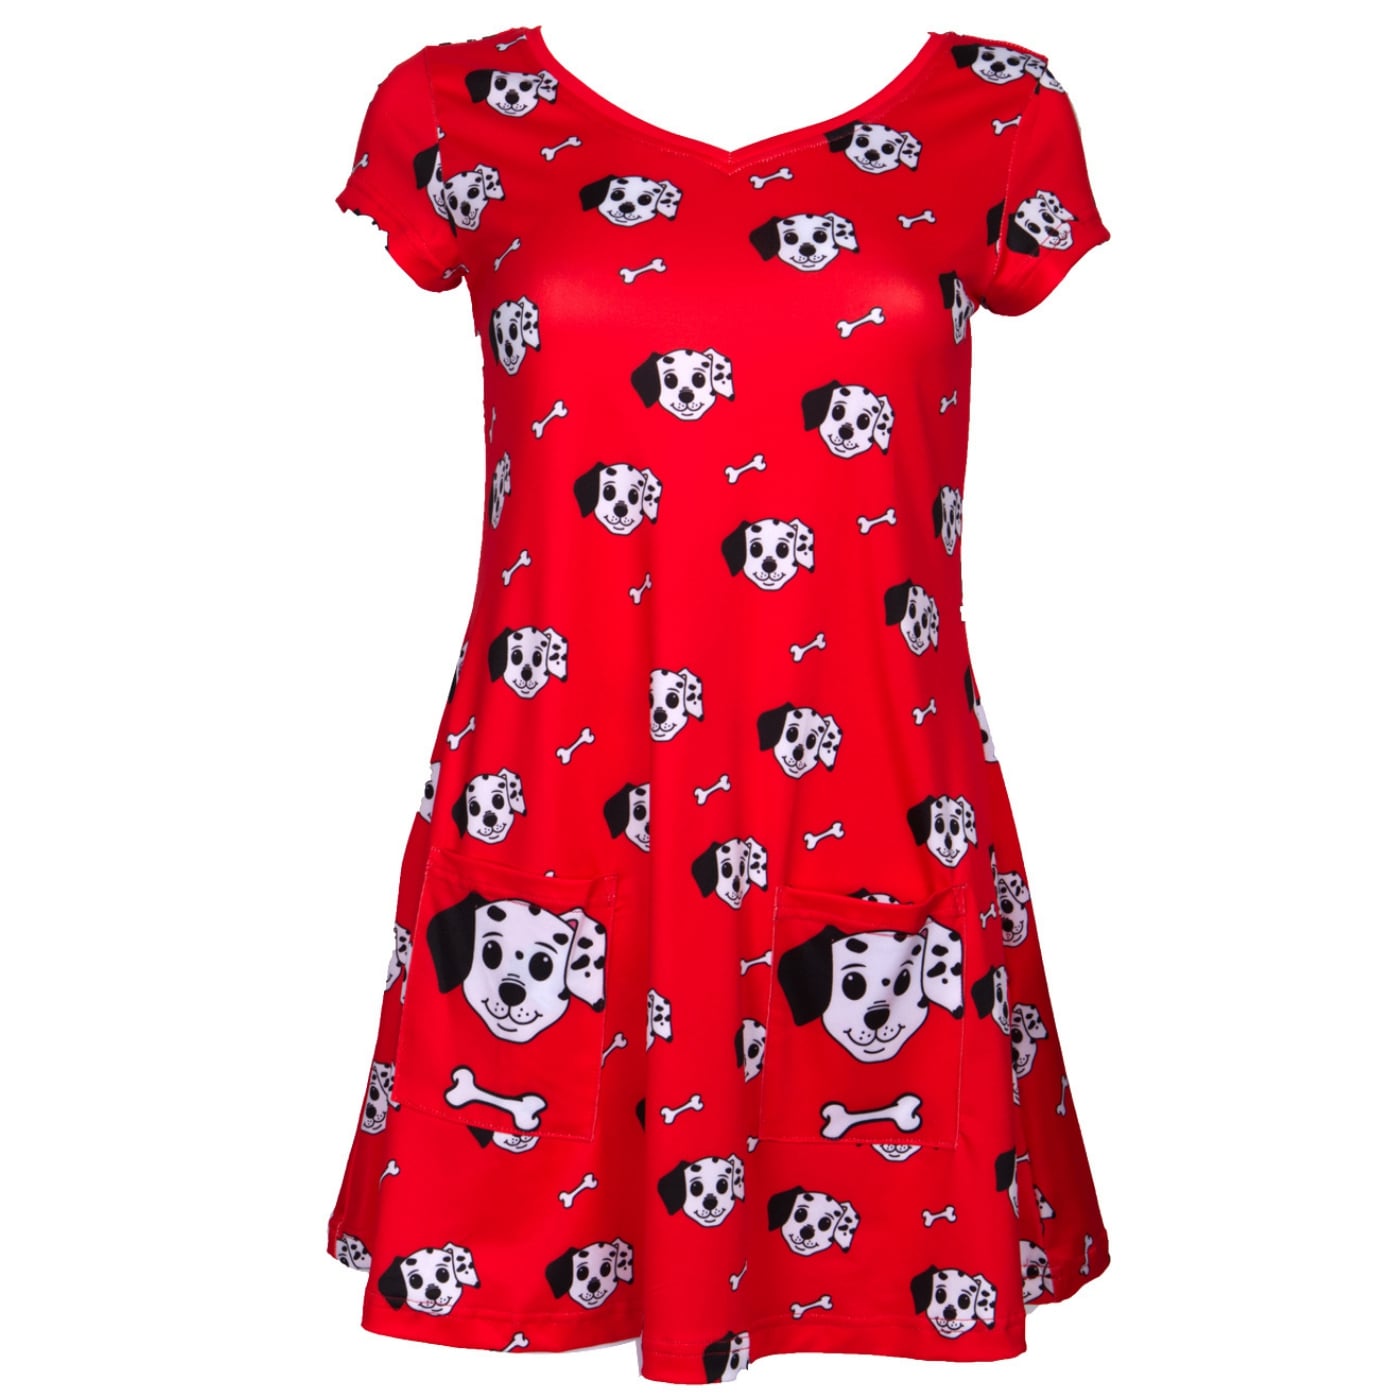 Puppy LoveTunic Top by RainbowsAndFairies.com.au (Dalmation Dog - Dog Bone - Fire Engine Red - Vintage Inspired - Kitsch - Top With Pockets - Mod) - SKU: CL_TUNIC_PUPPY_ORG - Pic-01